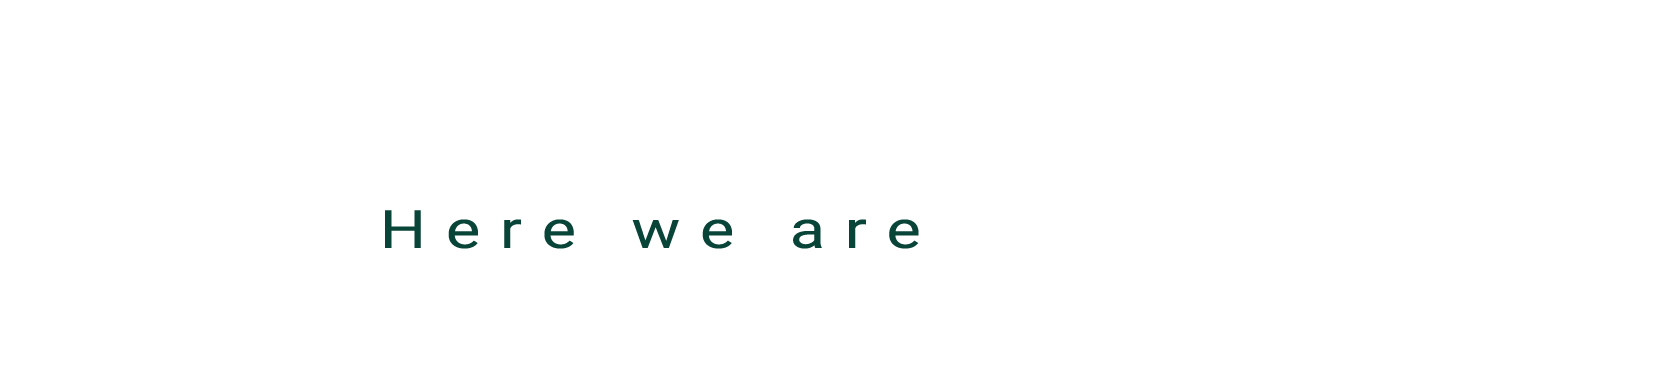 GlobalHands® - Here We Are footer logo